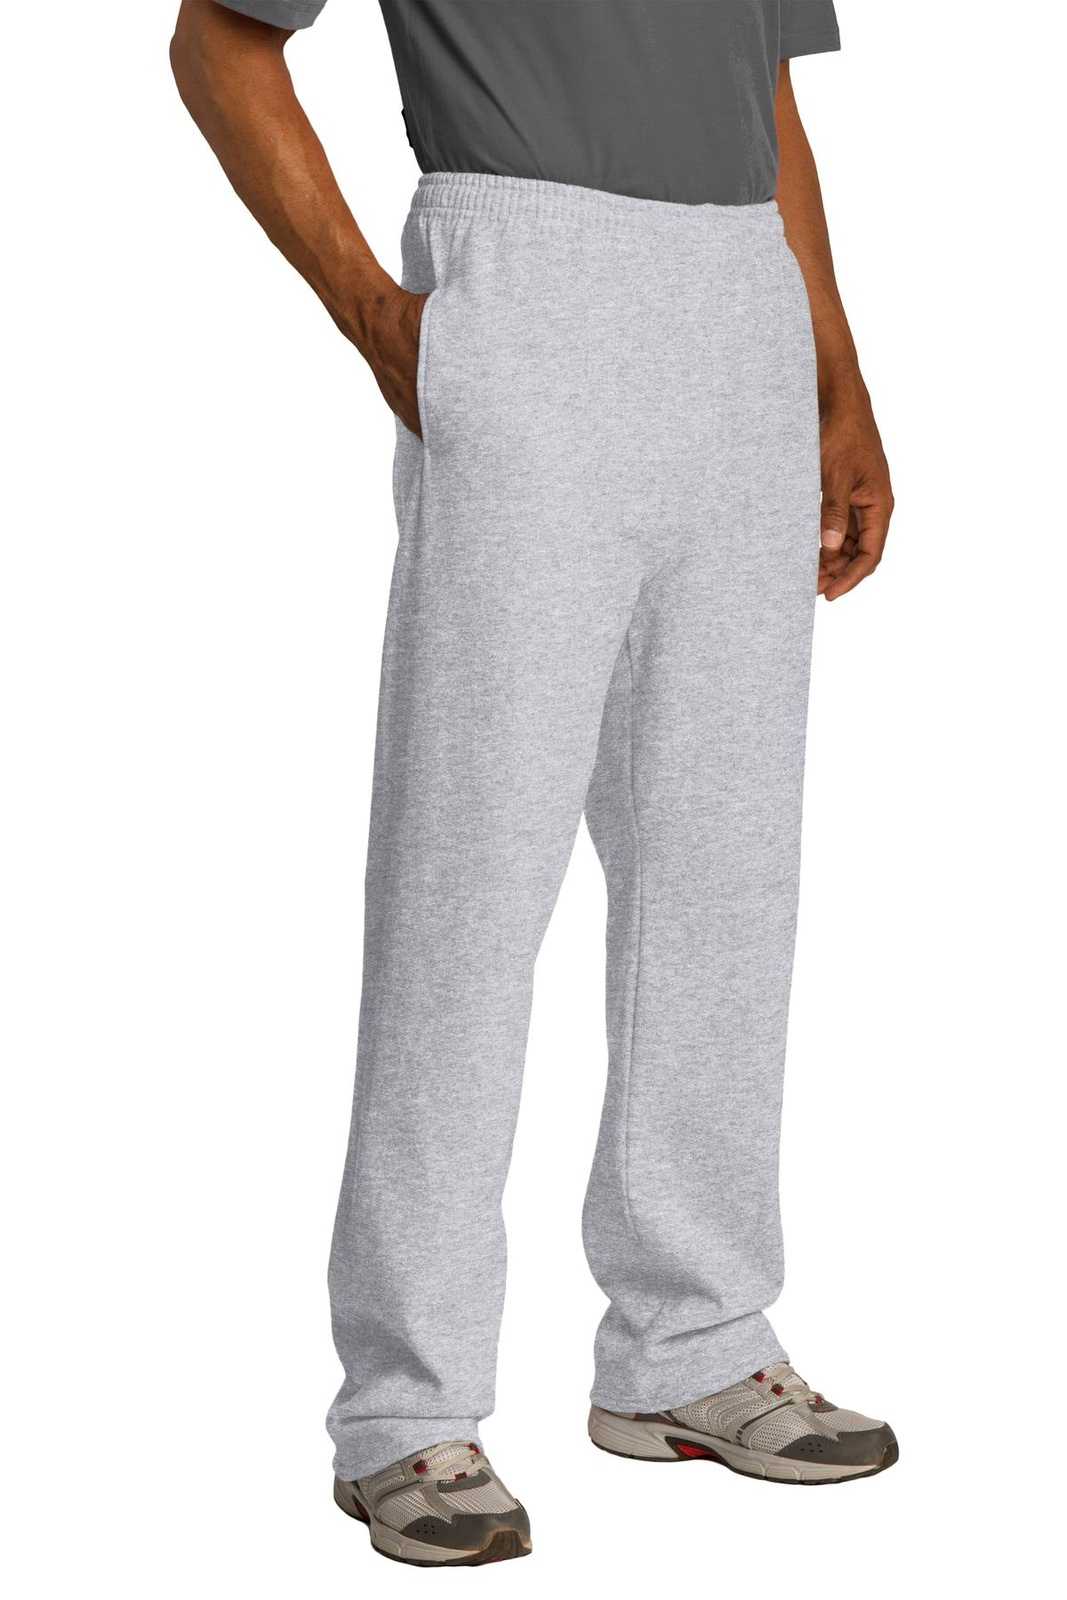 Jerzees 974MP Nublend Open Bottom Pant with Pockets - Ash - HIT a Double